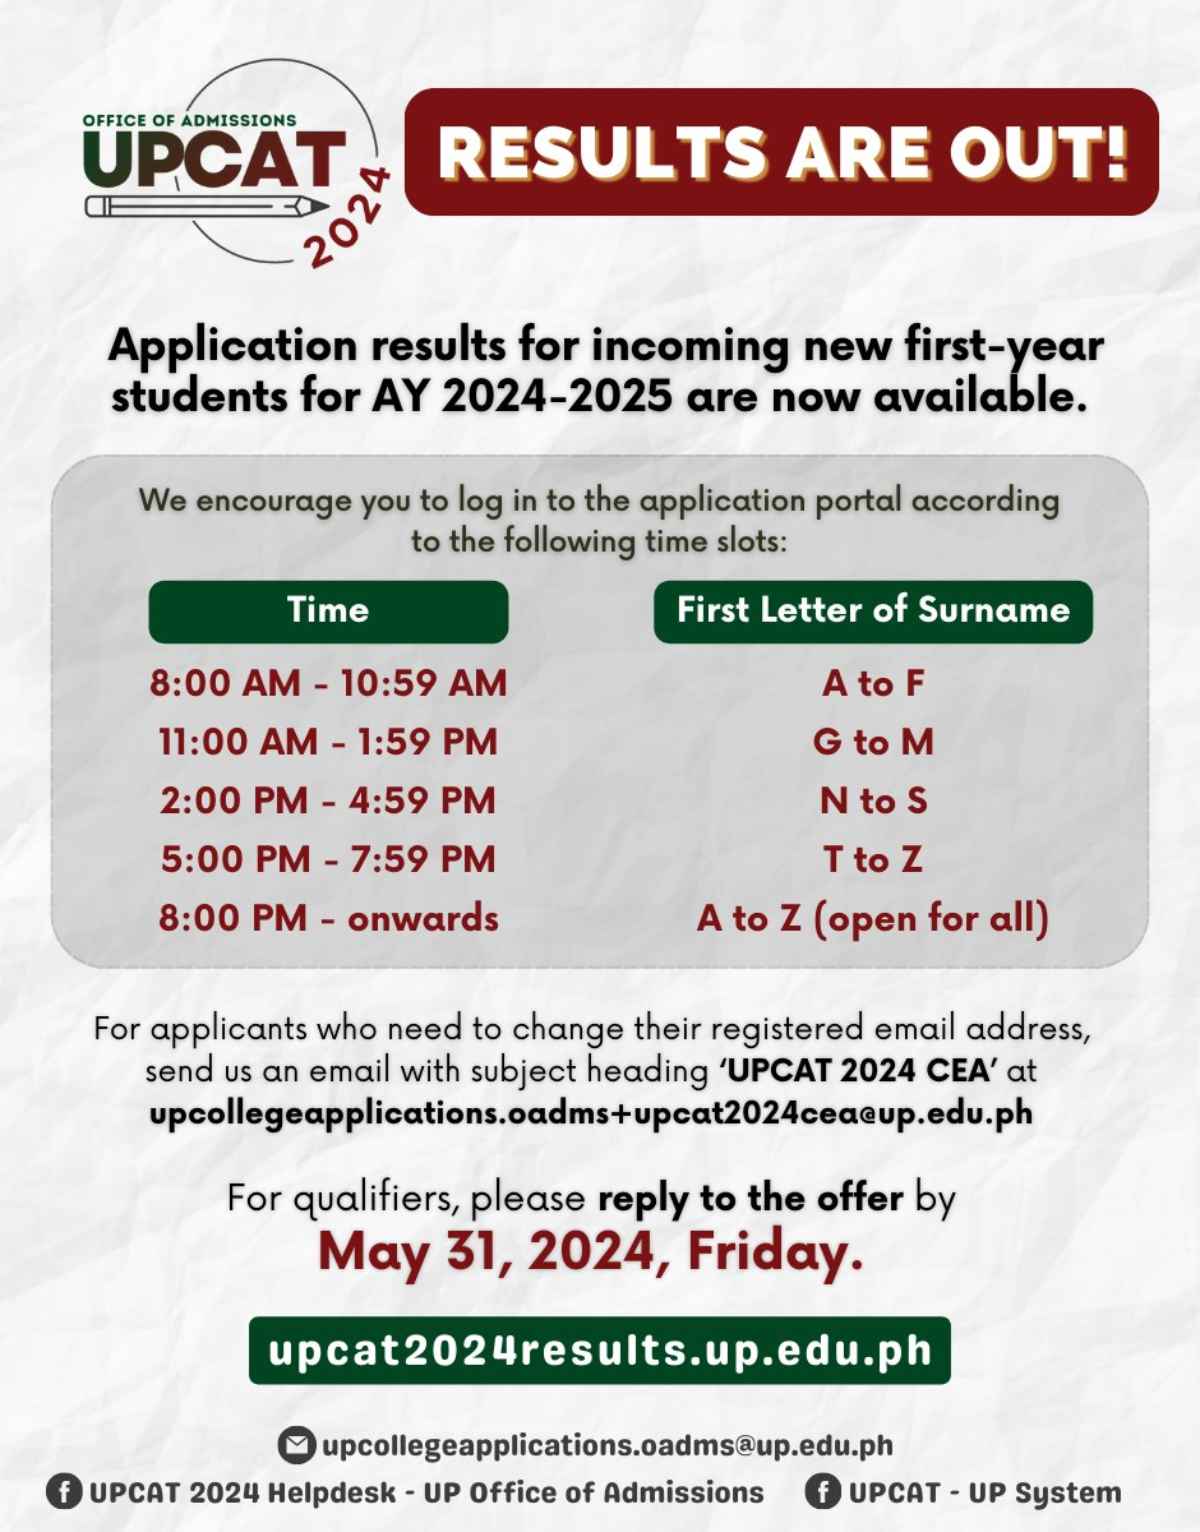 UPCAT Results for AY 2024-2025